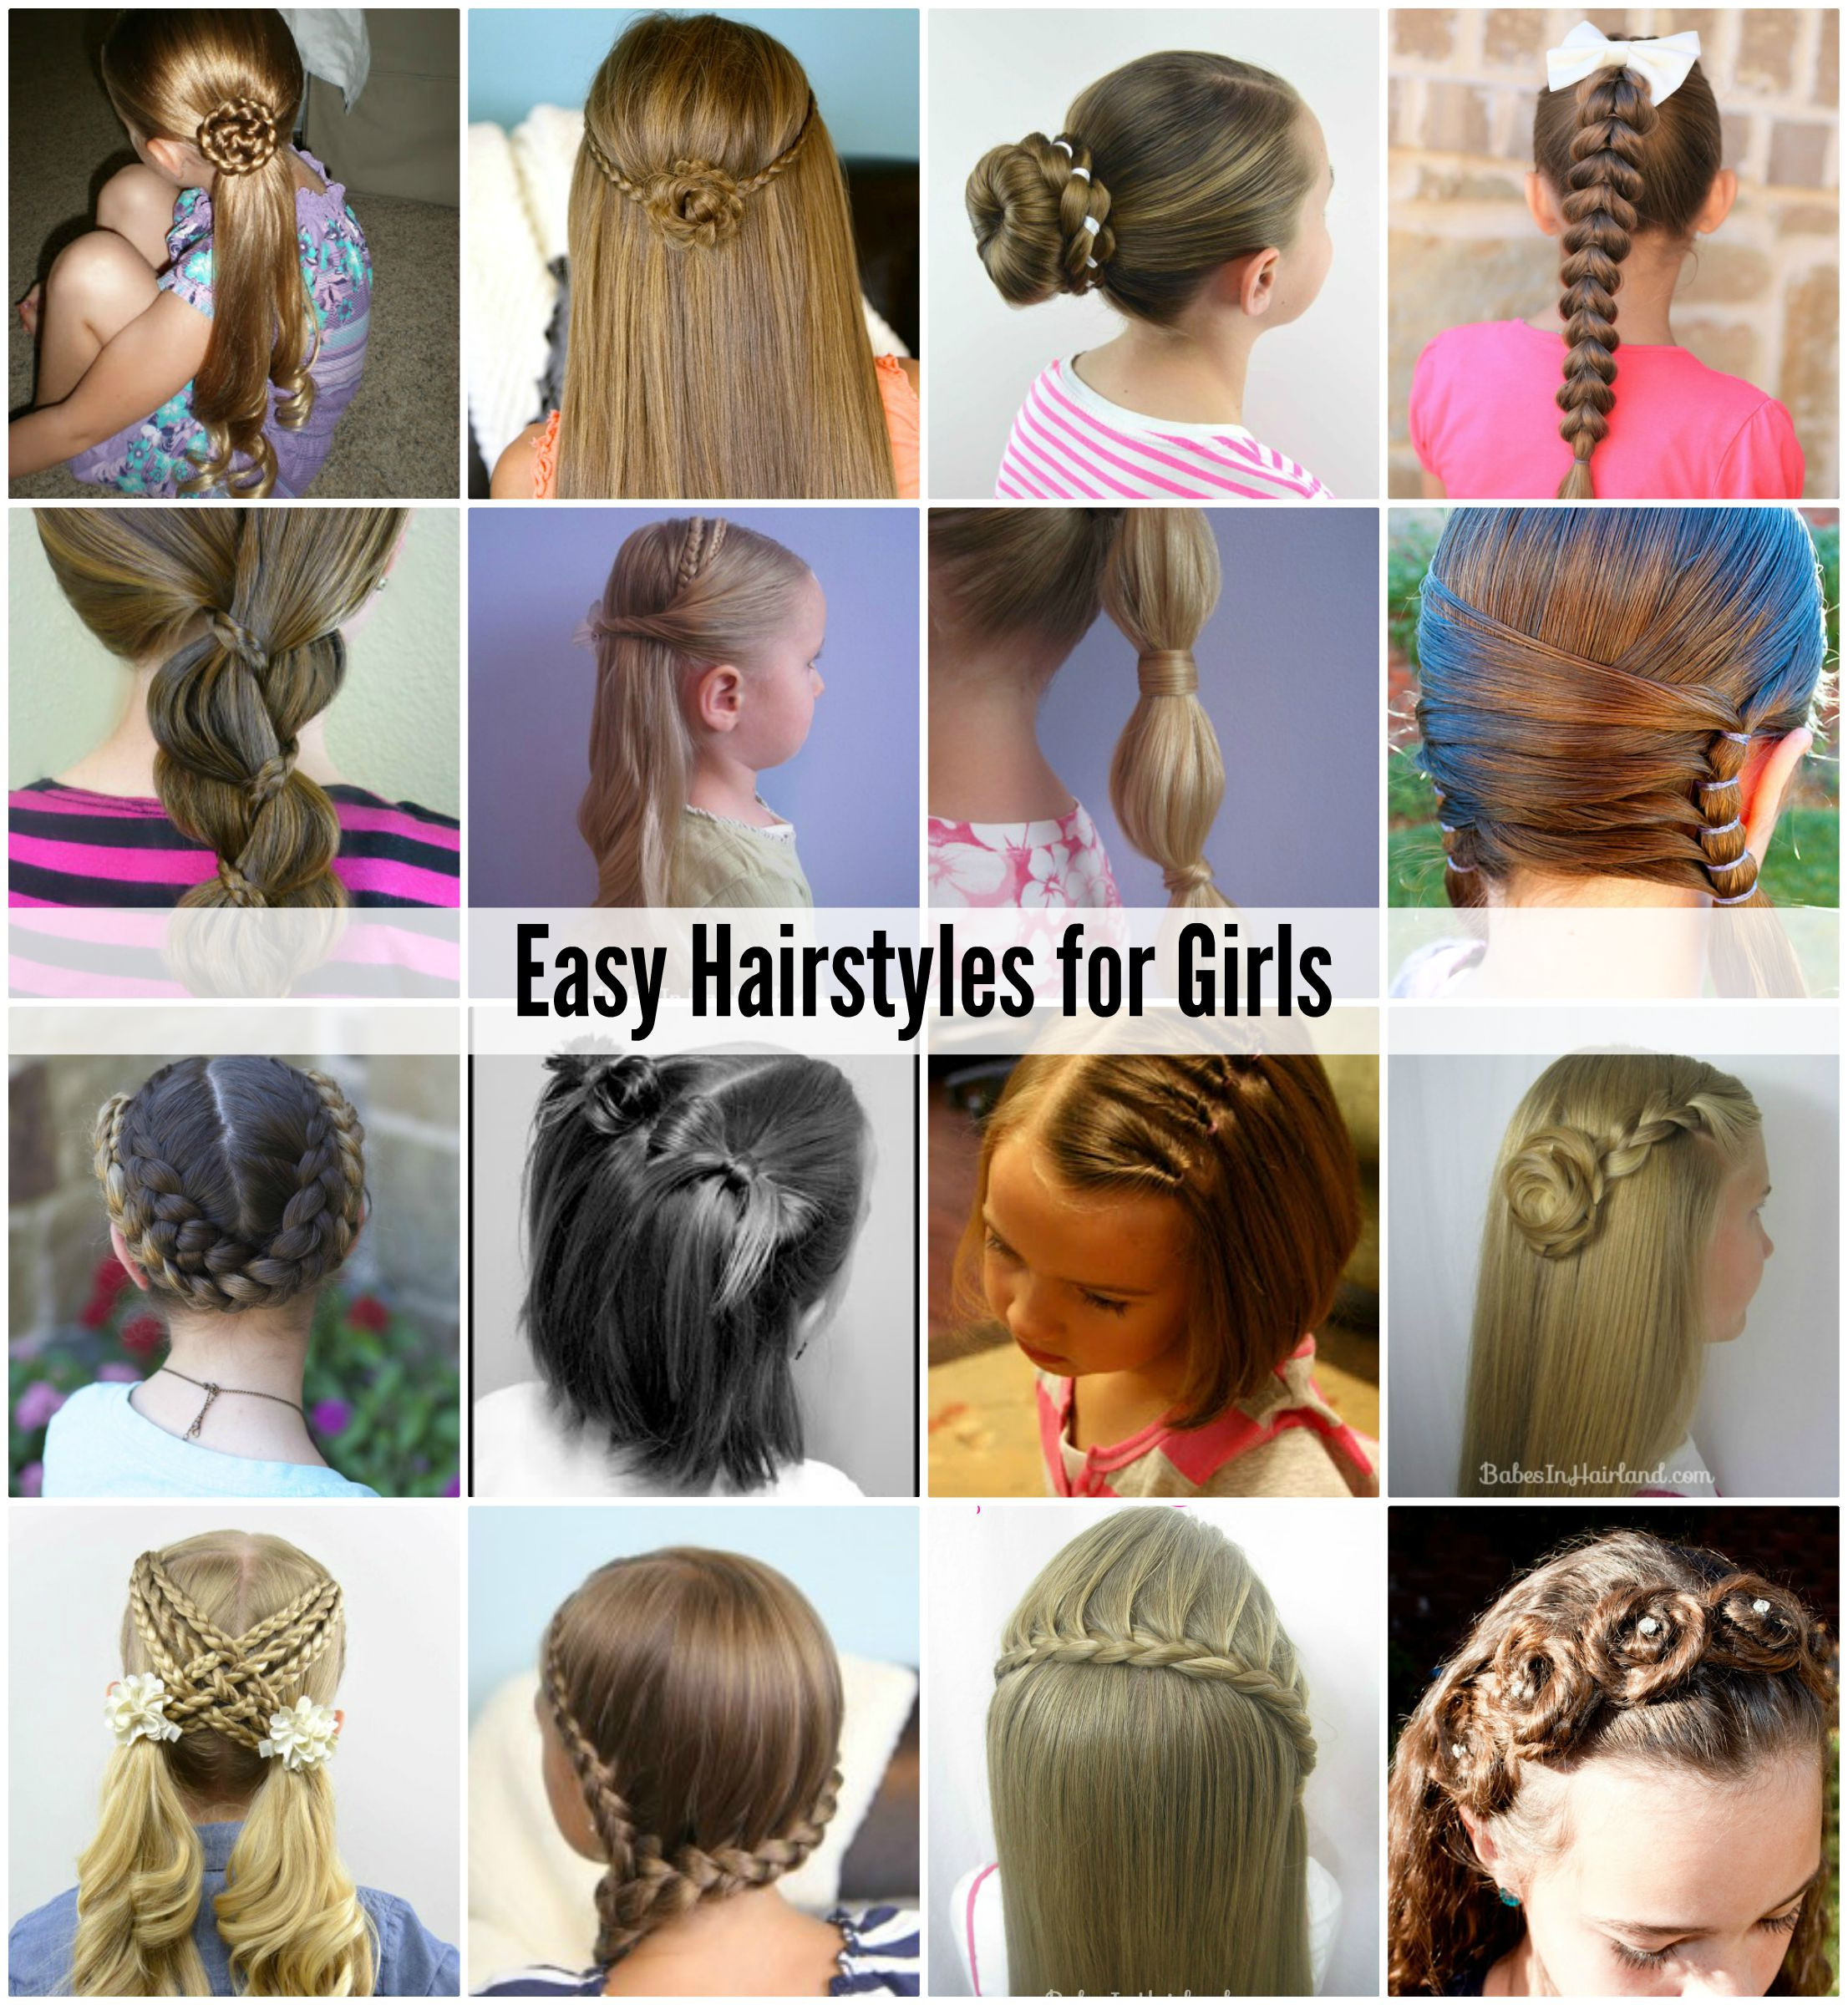 Girls Easy Hairstyles
 Cute and easy hairstyles for girls with medium hair